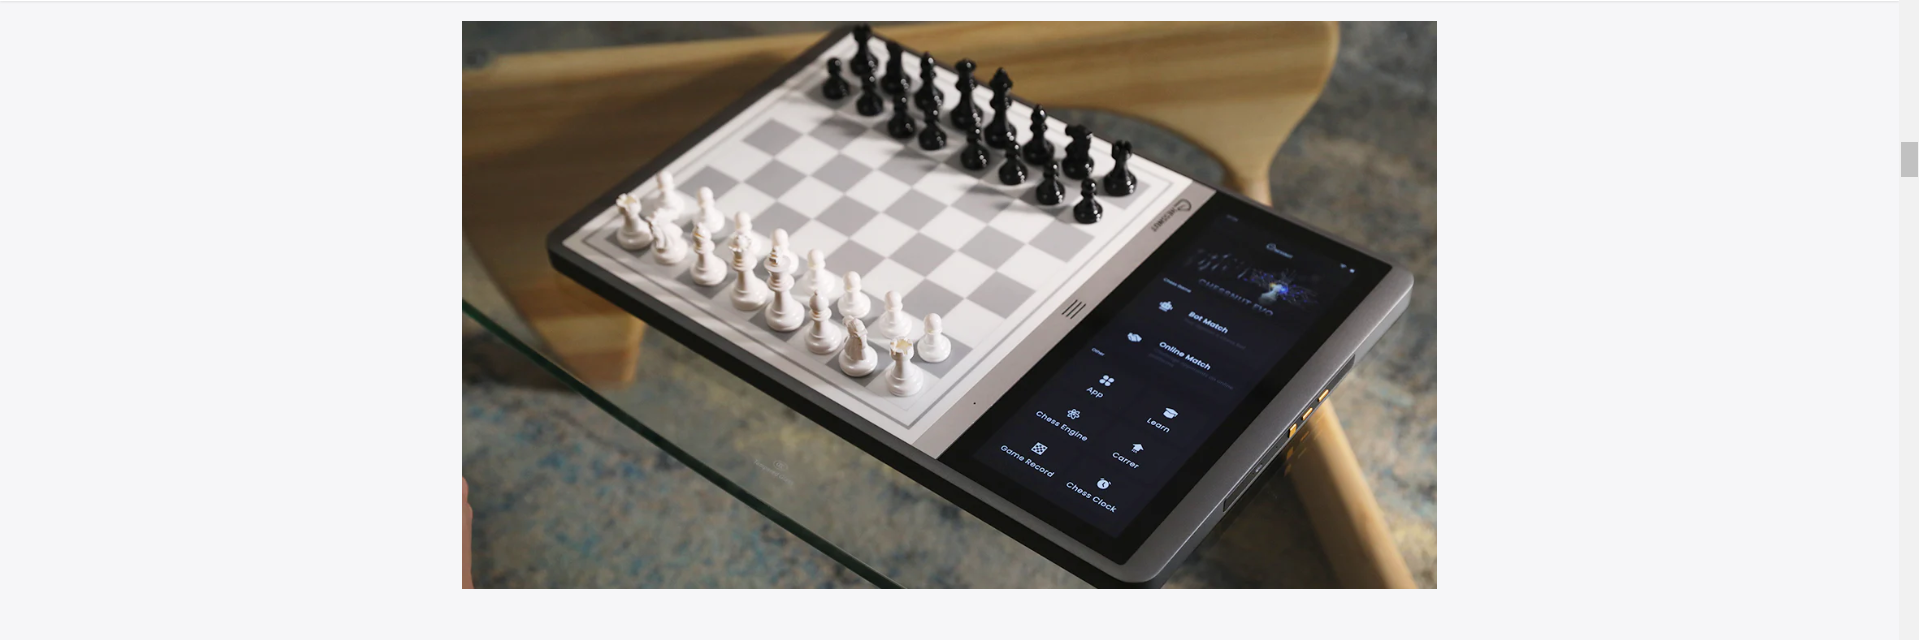 The Evolution of Chess: Computer Chess Boards for the Modern Player